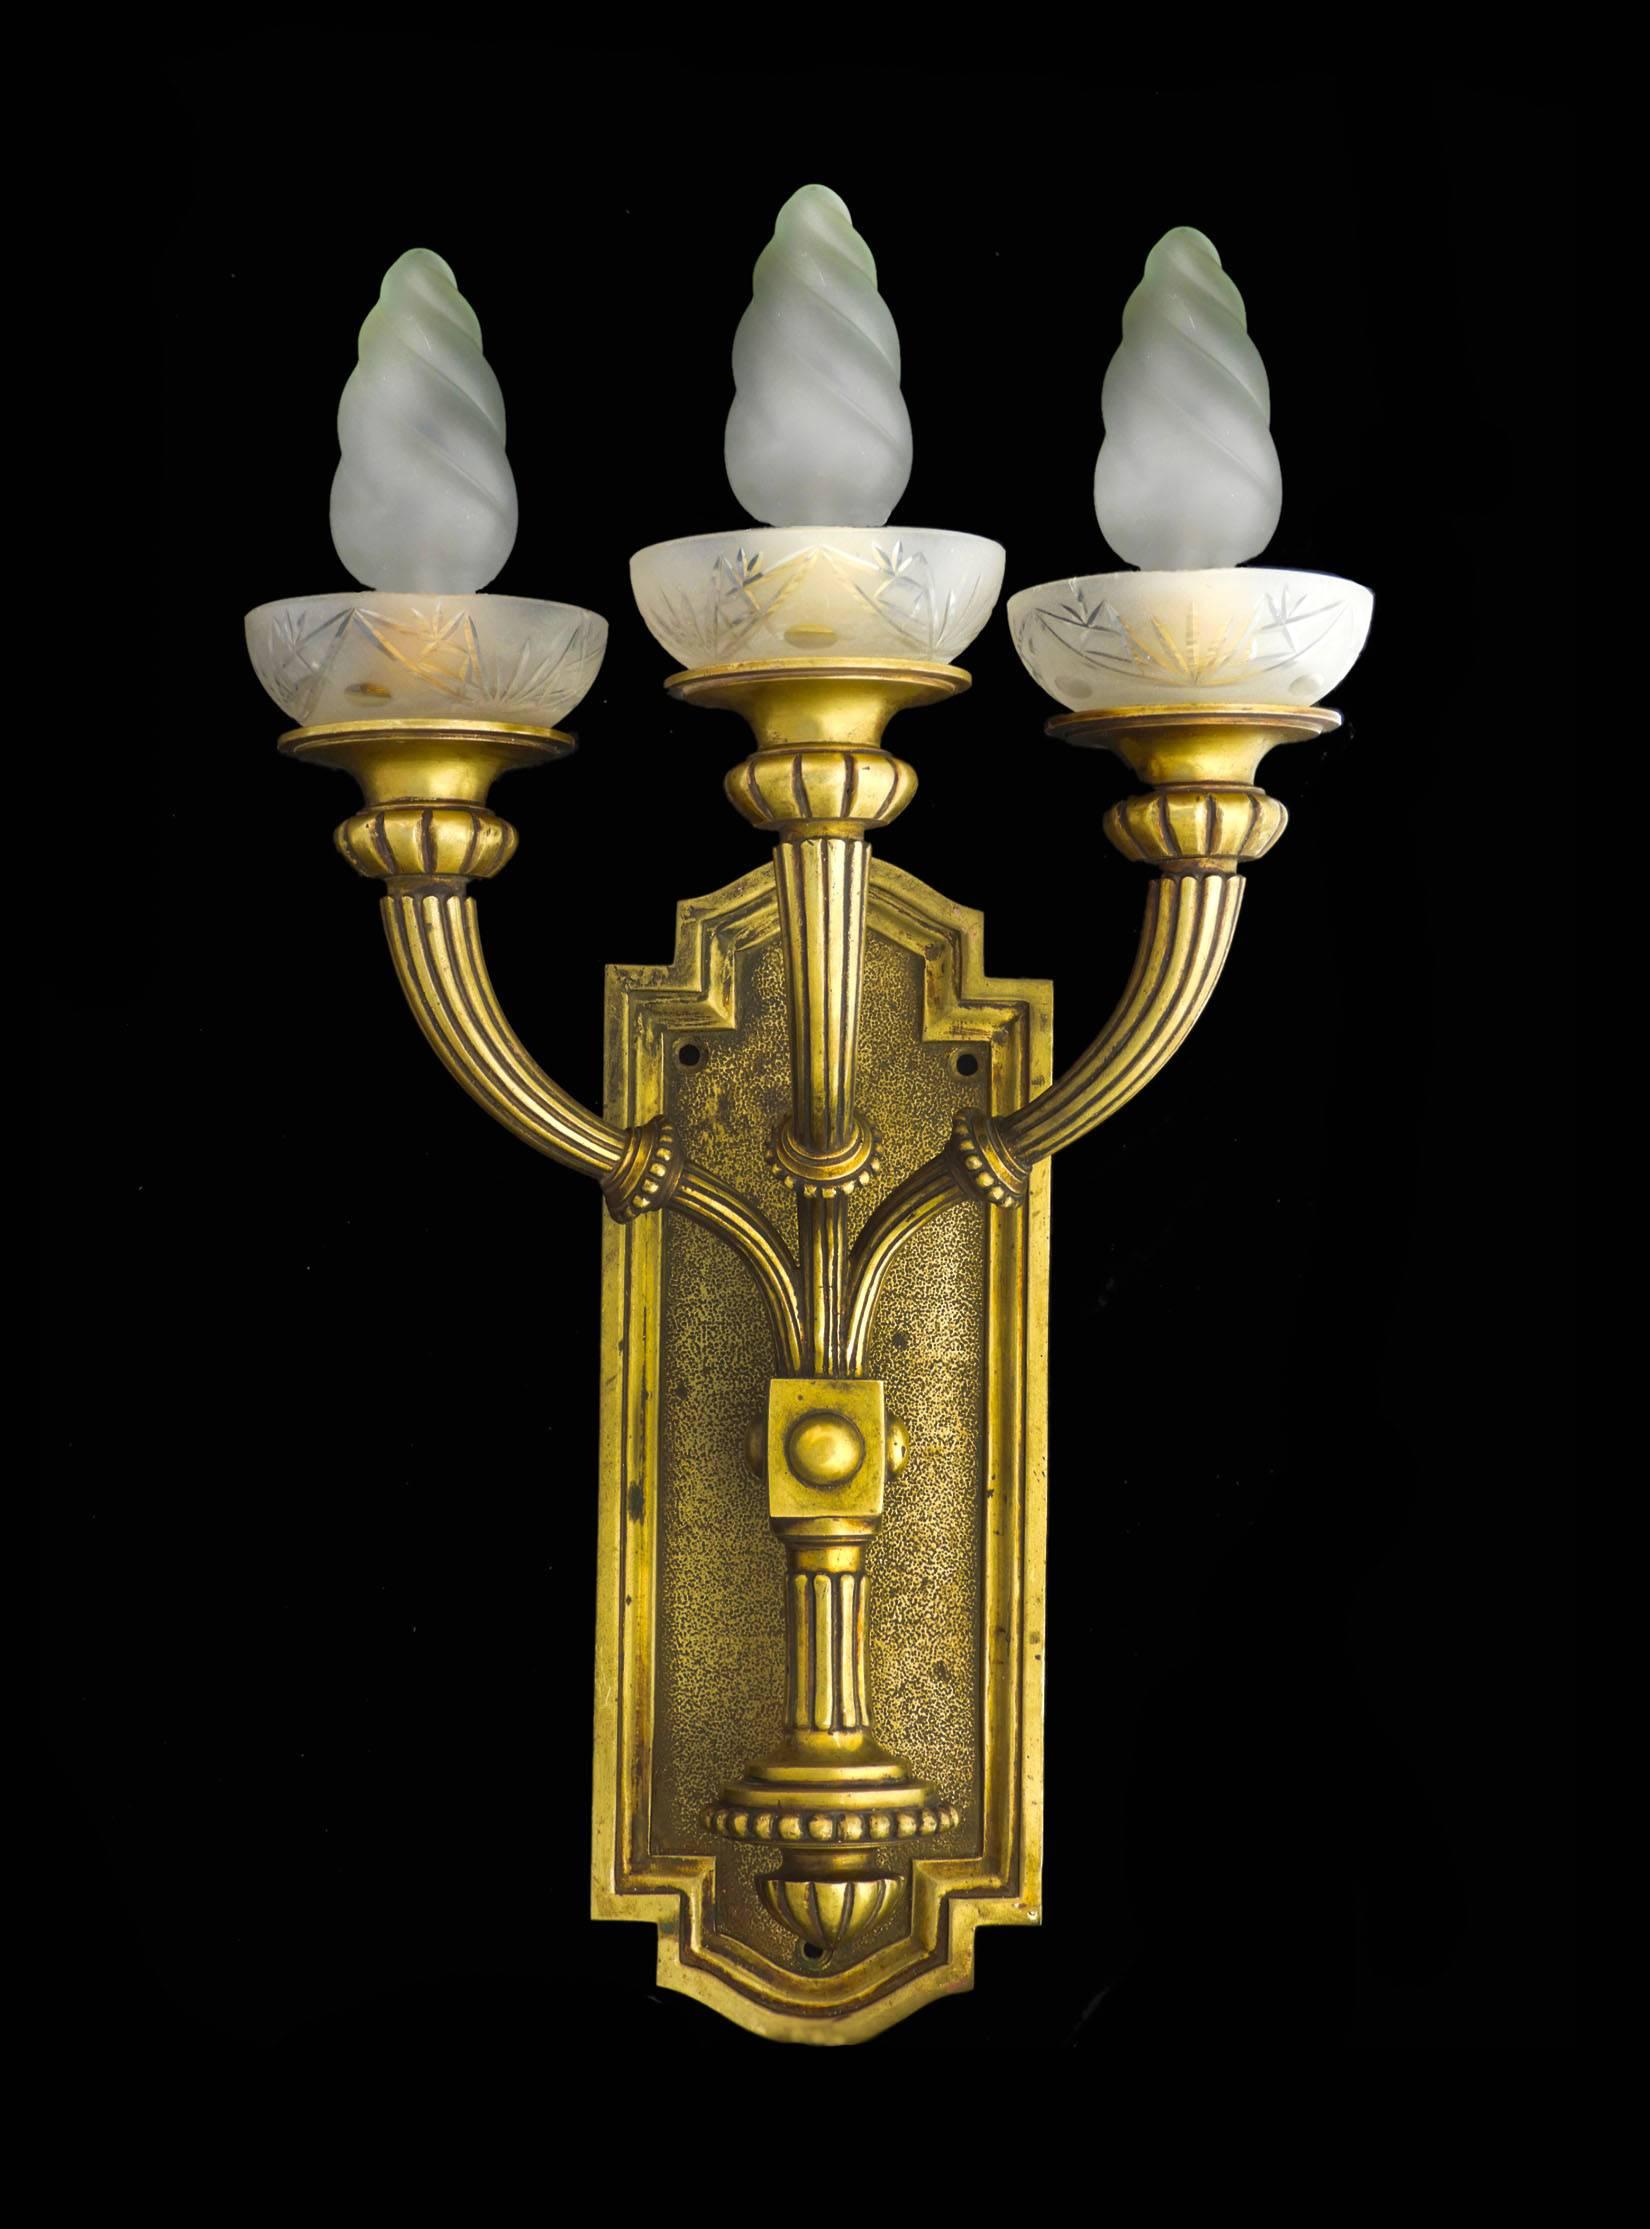 Pair of bronze Art Deco sconces 
Three arm wall lights with etched frosted glass candle cups, circa 1930
Good condition with minor signs of wear for their age.
These will be re-wired and tested to USA or UK and European standards ready to